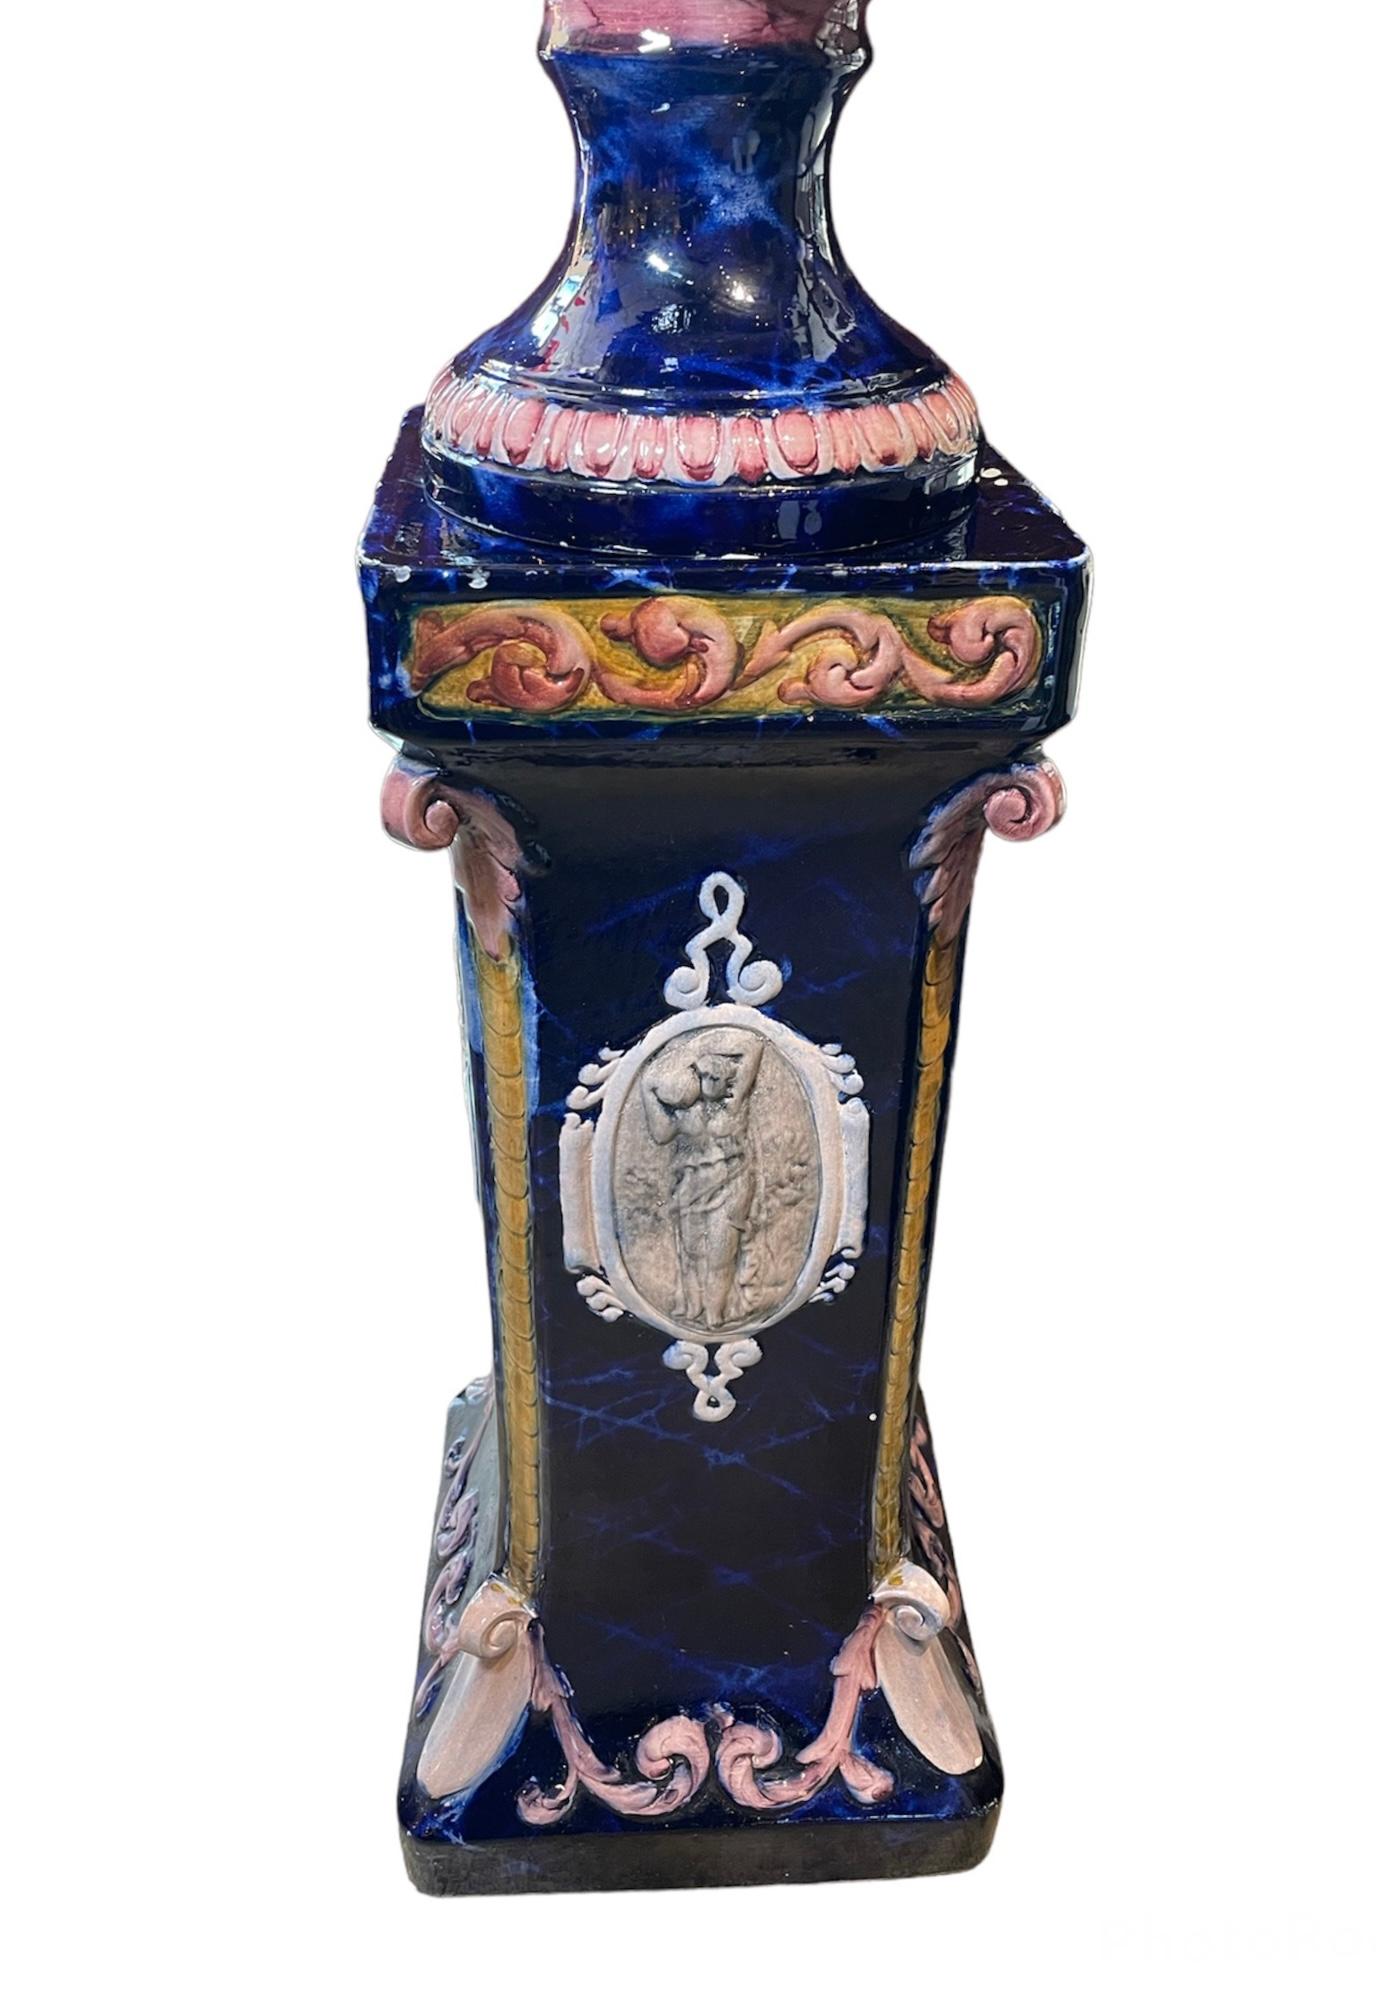 This is a Renaissance revival style large Majolica amphora vase with rectangular pedestal. Their background are hand painted cobalt blue and decorated with an off-white relief of Greek/Roman scenes. The amphora is adorned with salmon color scrolls